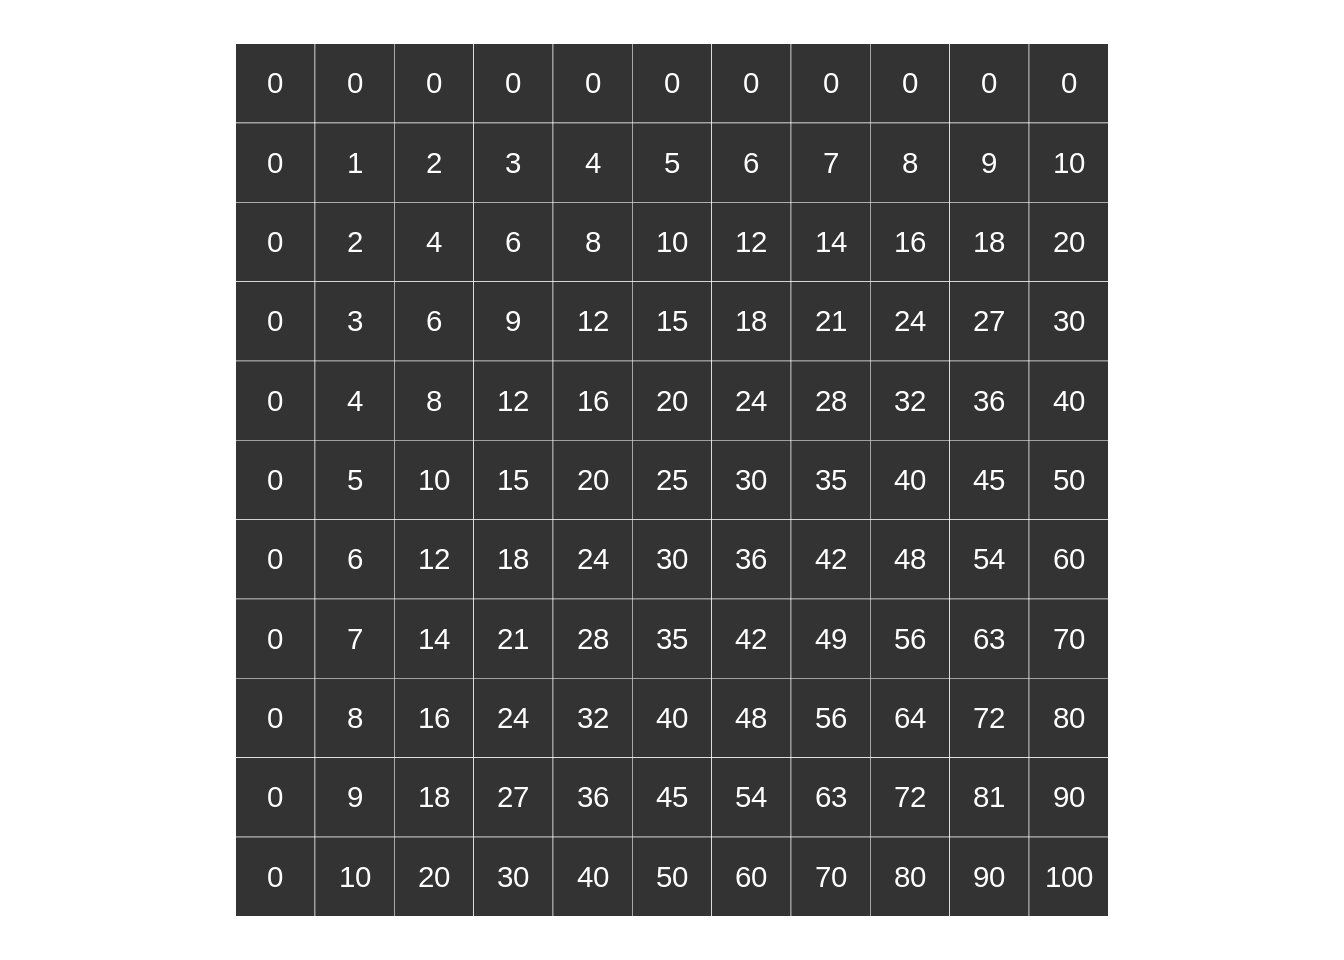 multiplication-table-multiplication-tables-wolfram-programming-lab-gallery-c-is-the-same-as